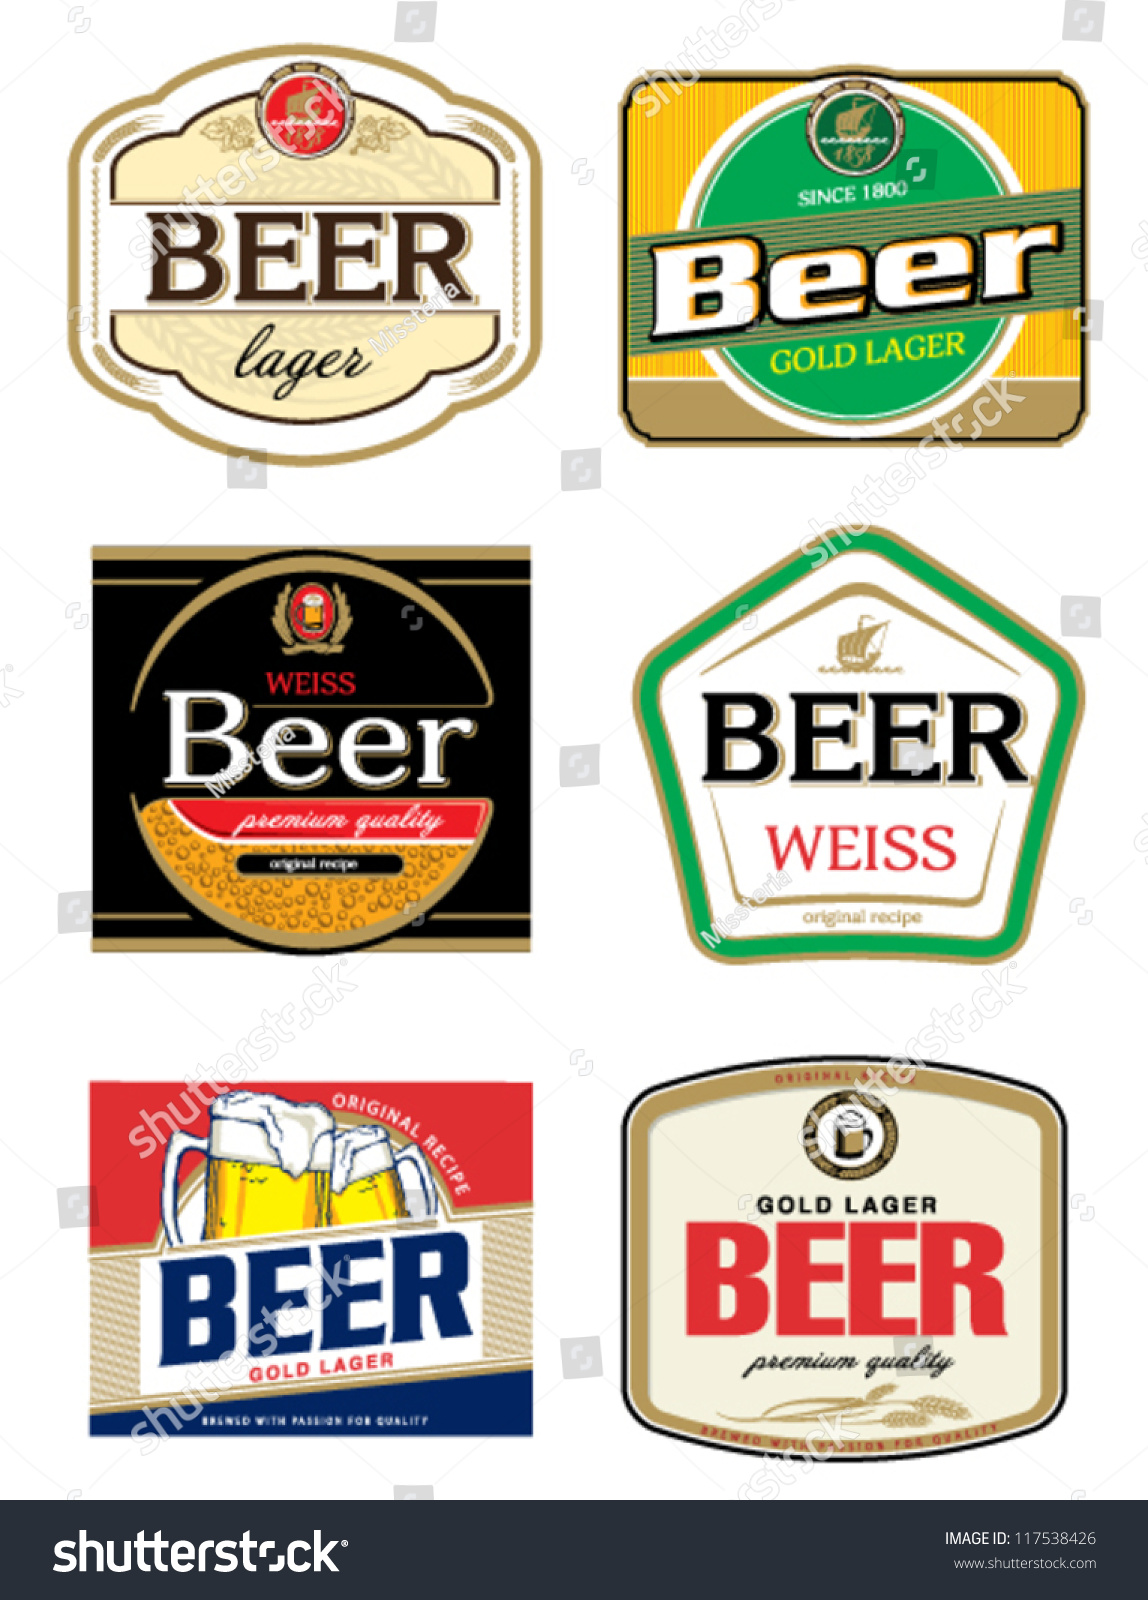 beer label clipart free - photo #43